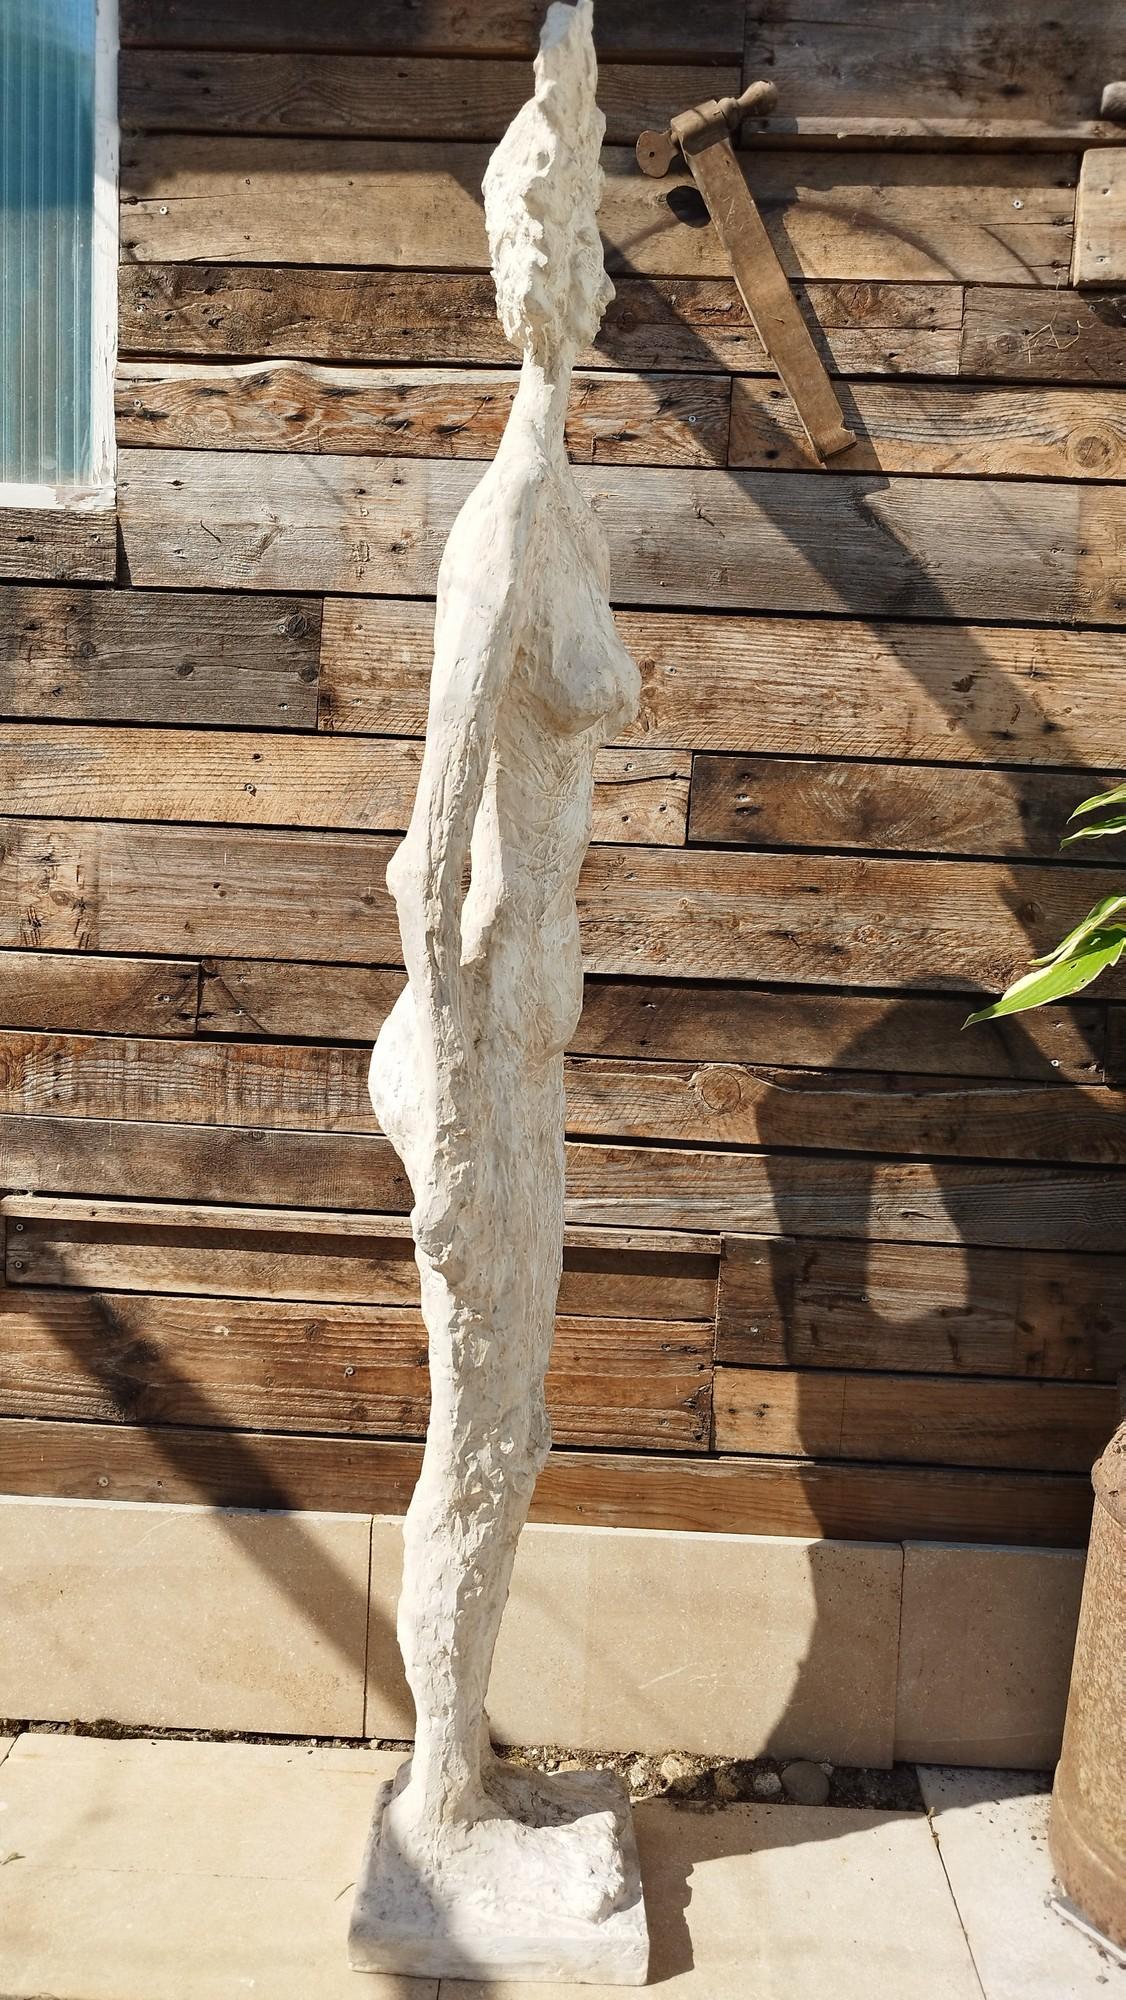 Unique, large scale, handcrafted fiberglass statue from the 70s in France, unsigned.
It's existentialist manner is reminiscent of the works by Alberto Giacometti, Robert Couturier, and Germaine Richier. Depending on the light, the patina changes